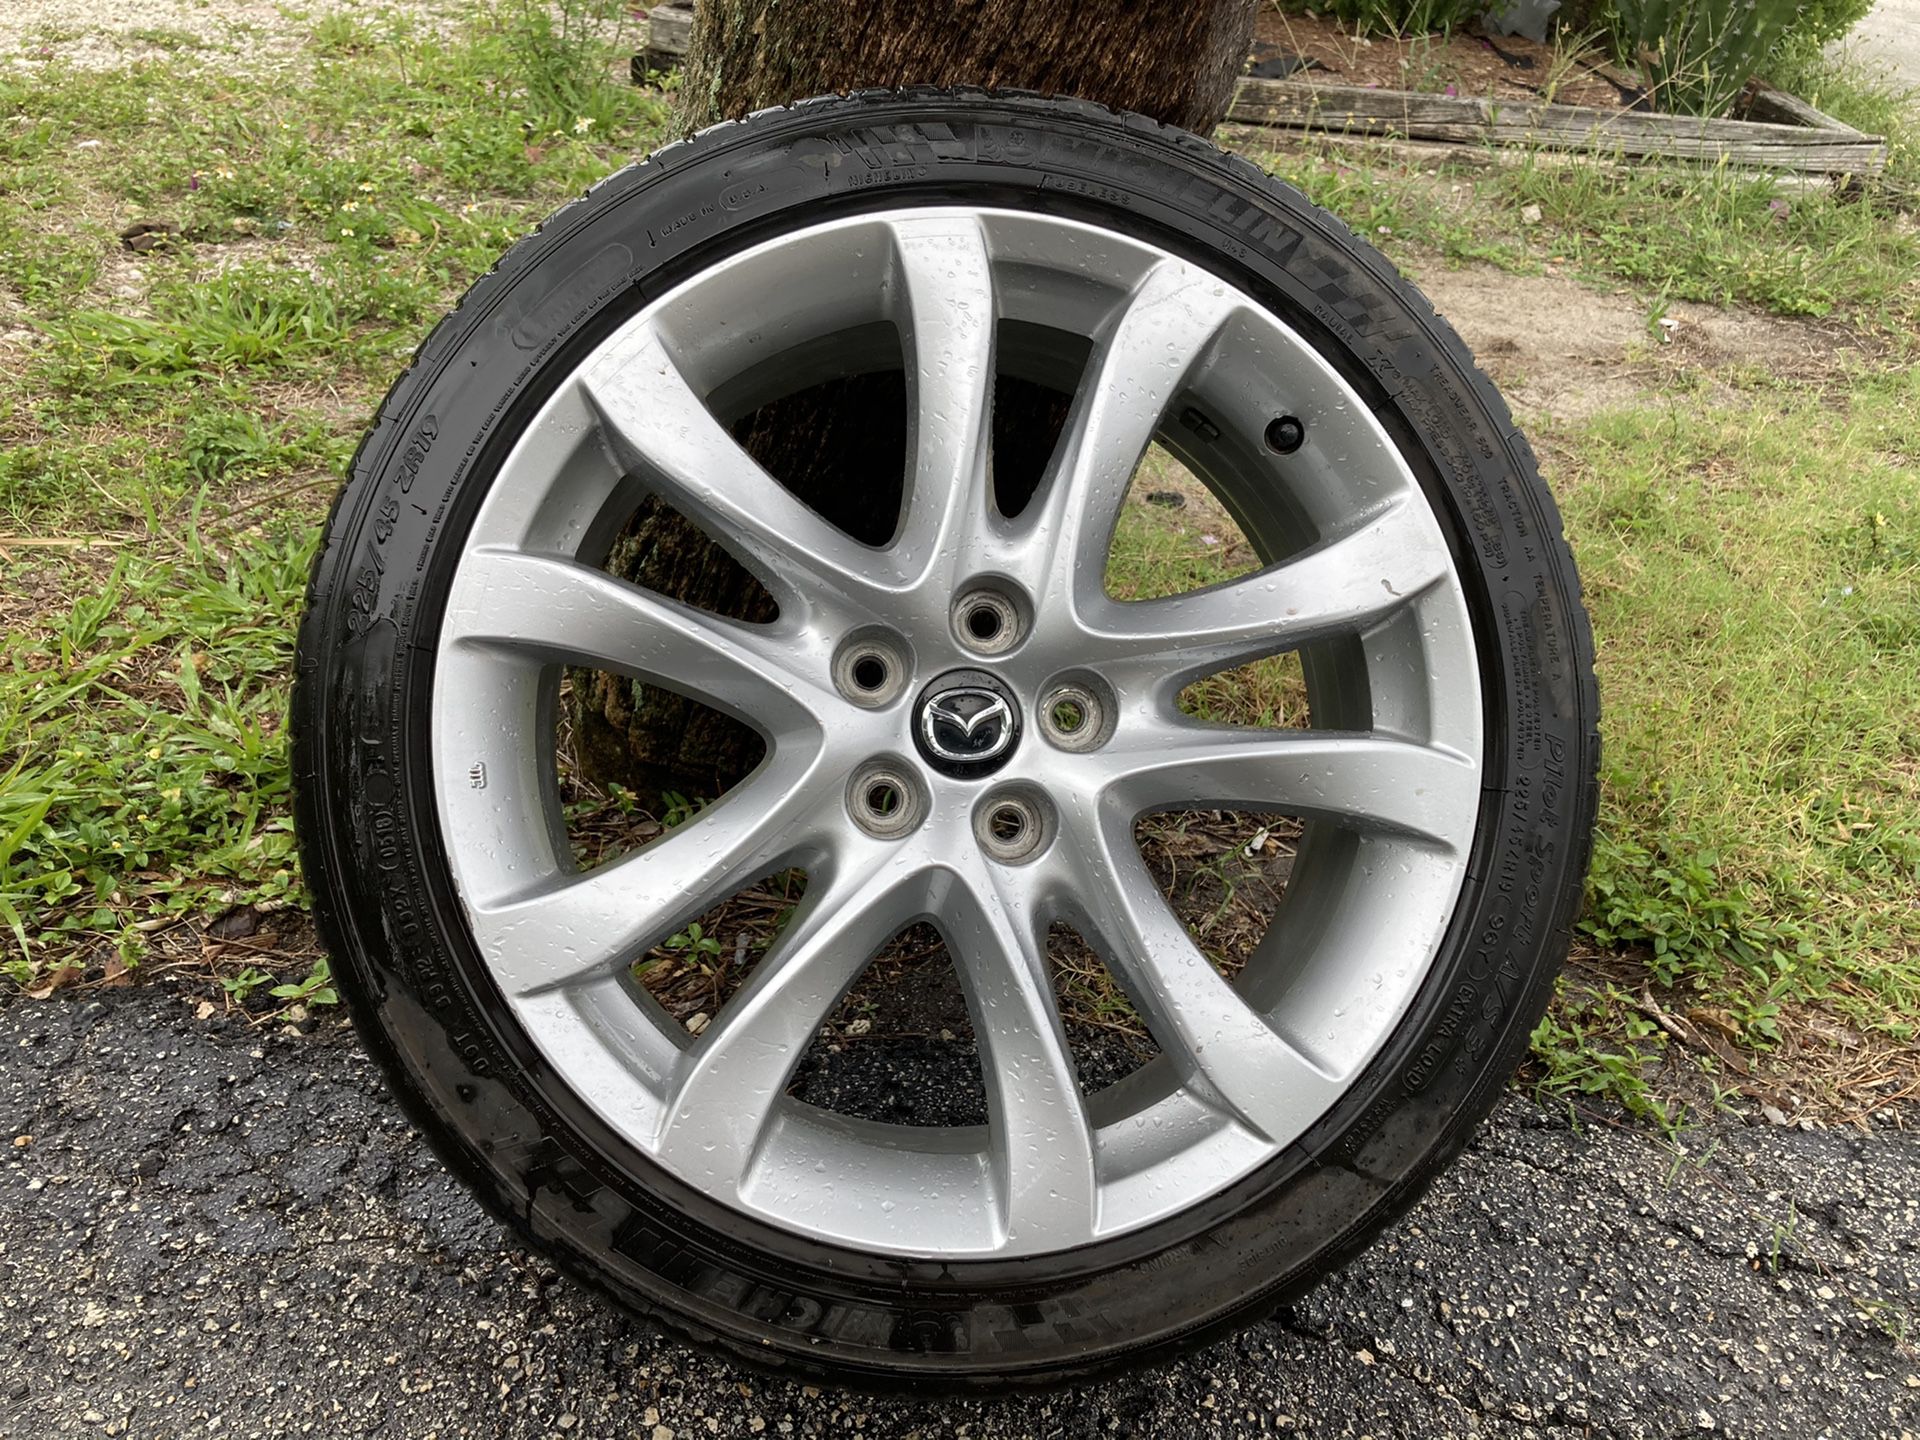 Selling two Mazda 6 19” rims with 50% tread on each